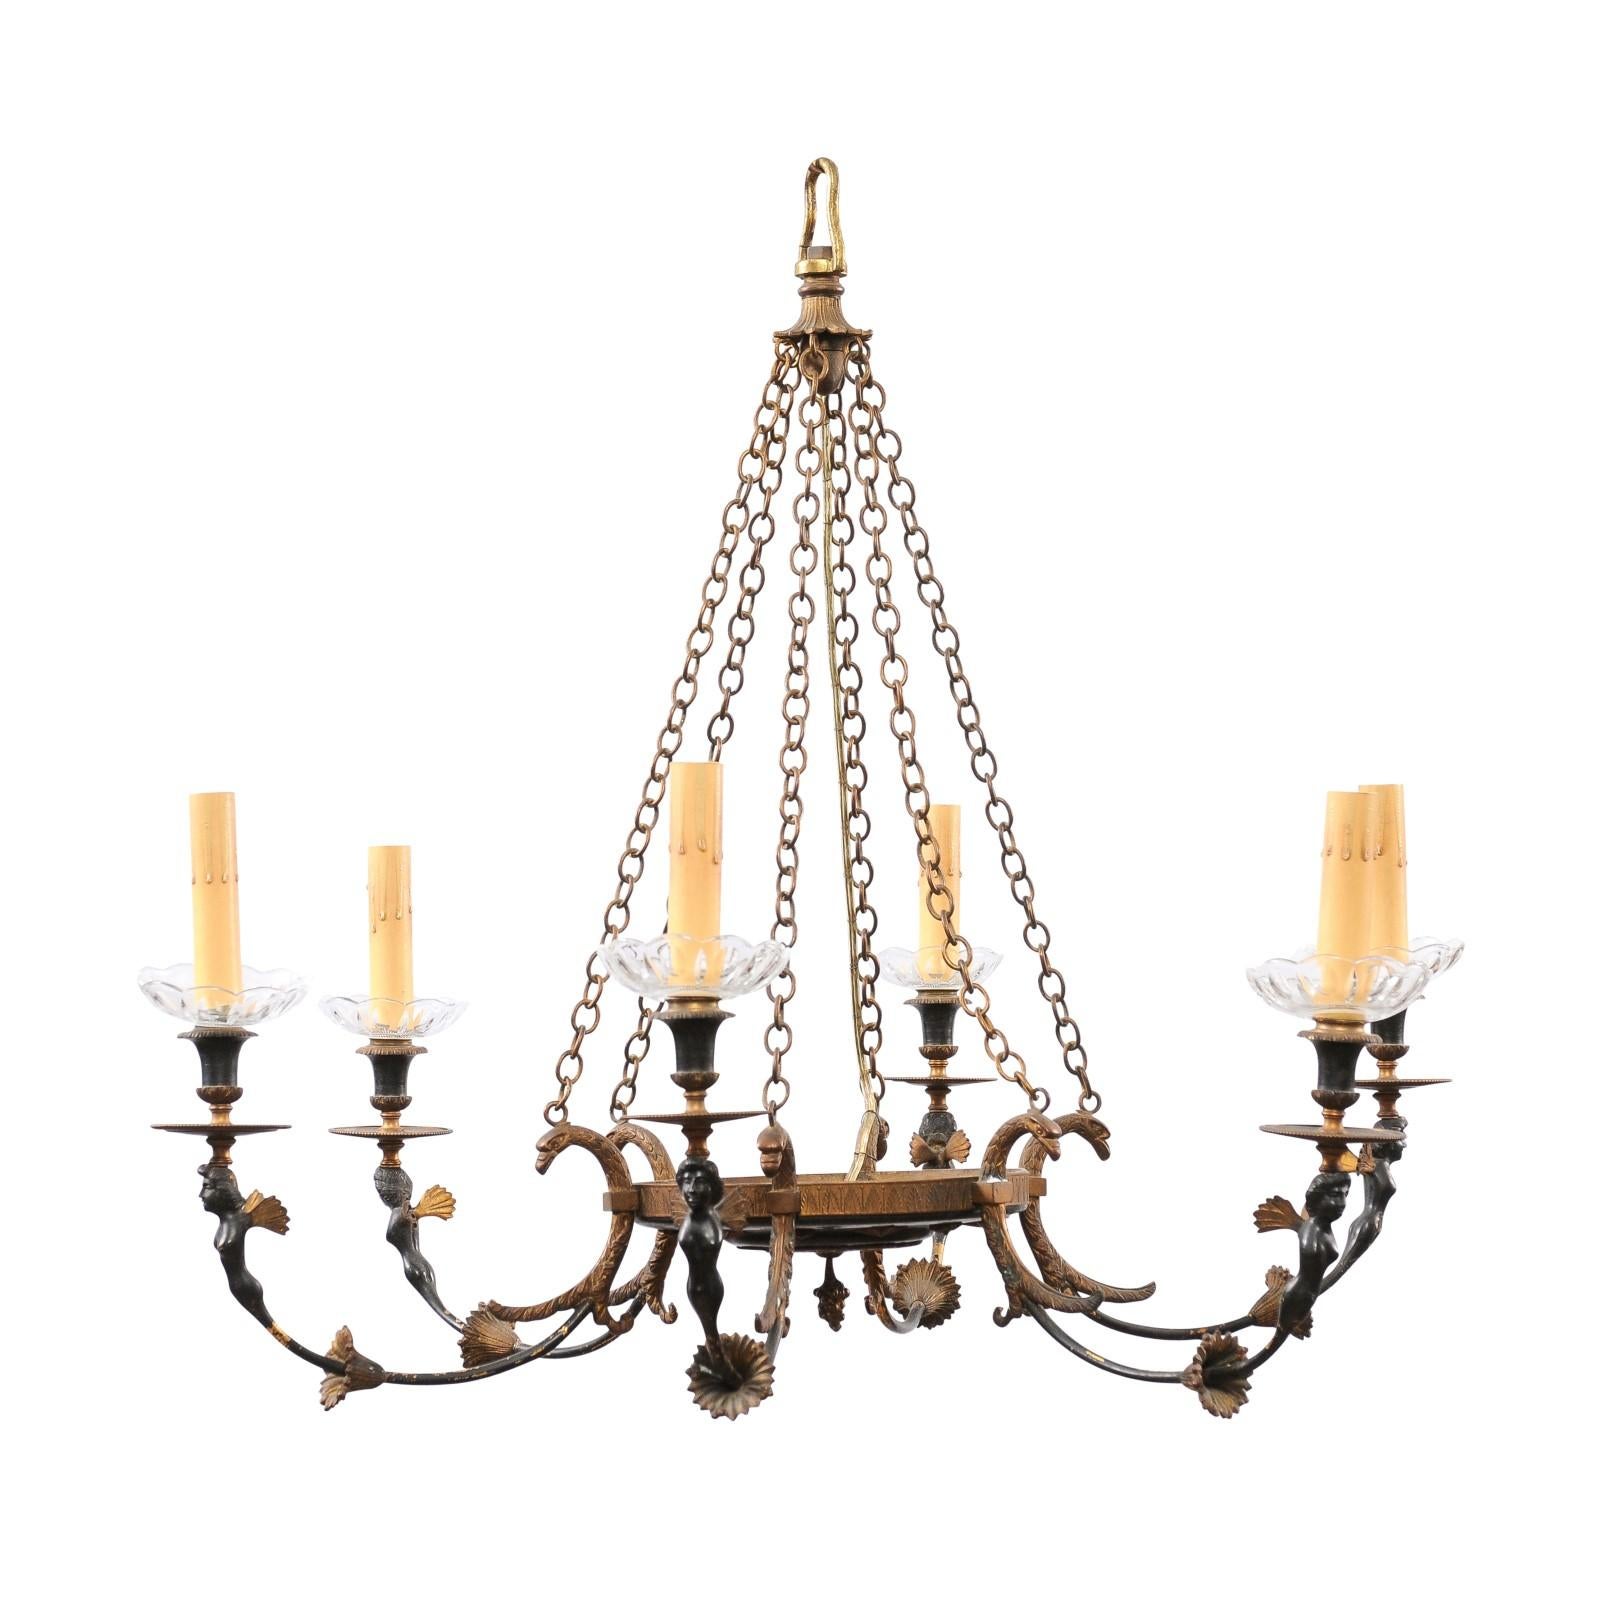 A Russian Empire style black and gold bronze chandelier from the 20th century, with six lights, classical figures and foliage motifs. Created in Russia during the 20th century, this Empire style chandelier features a central basket connected to the